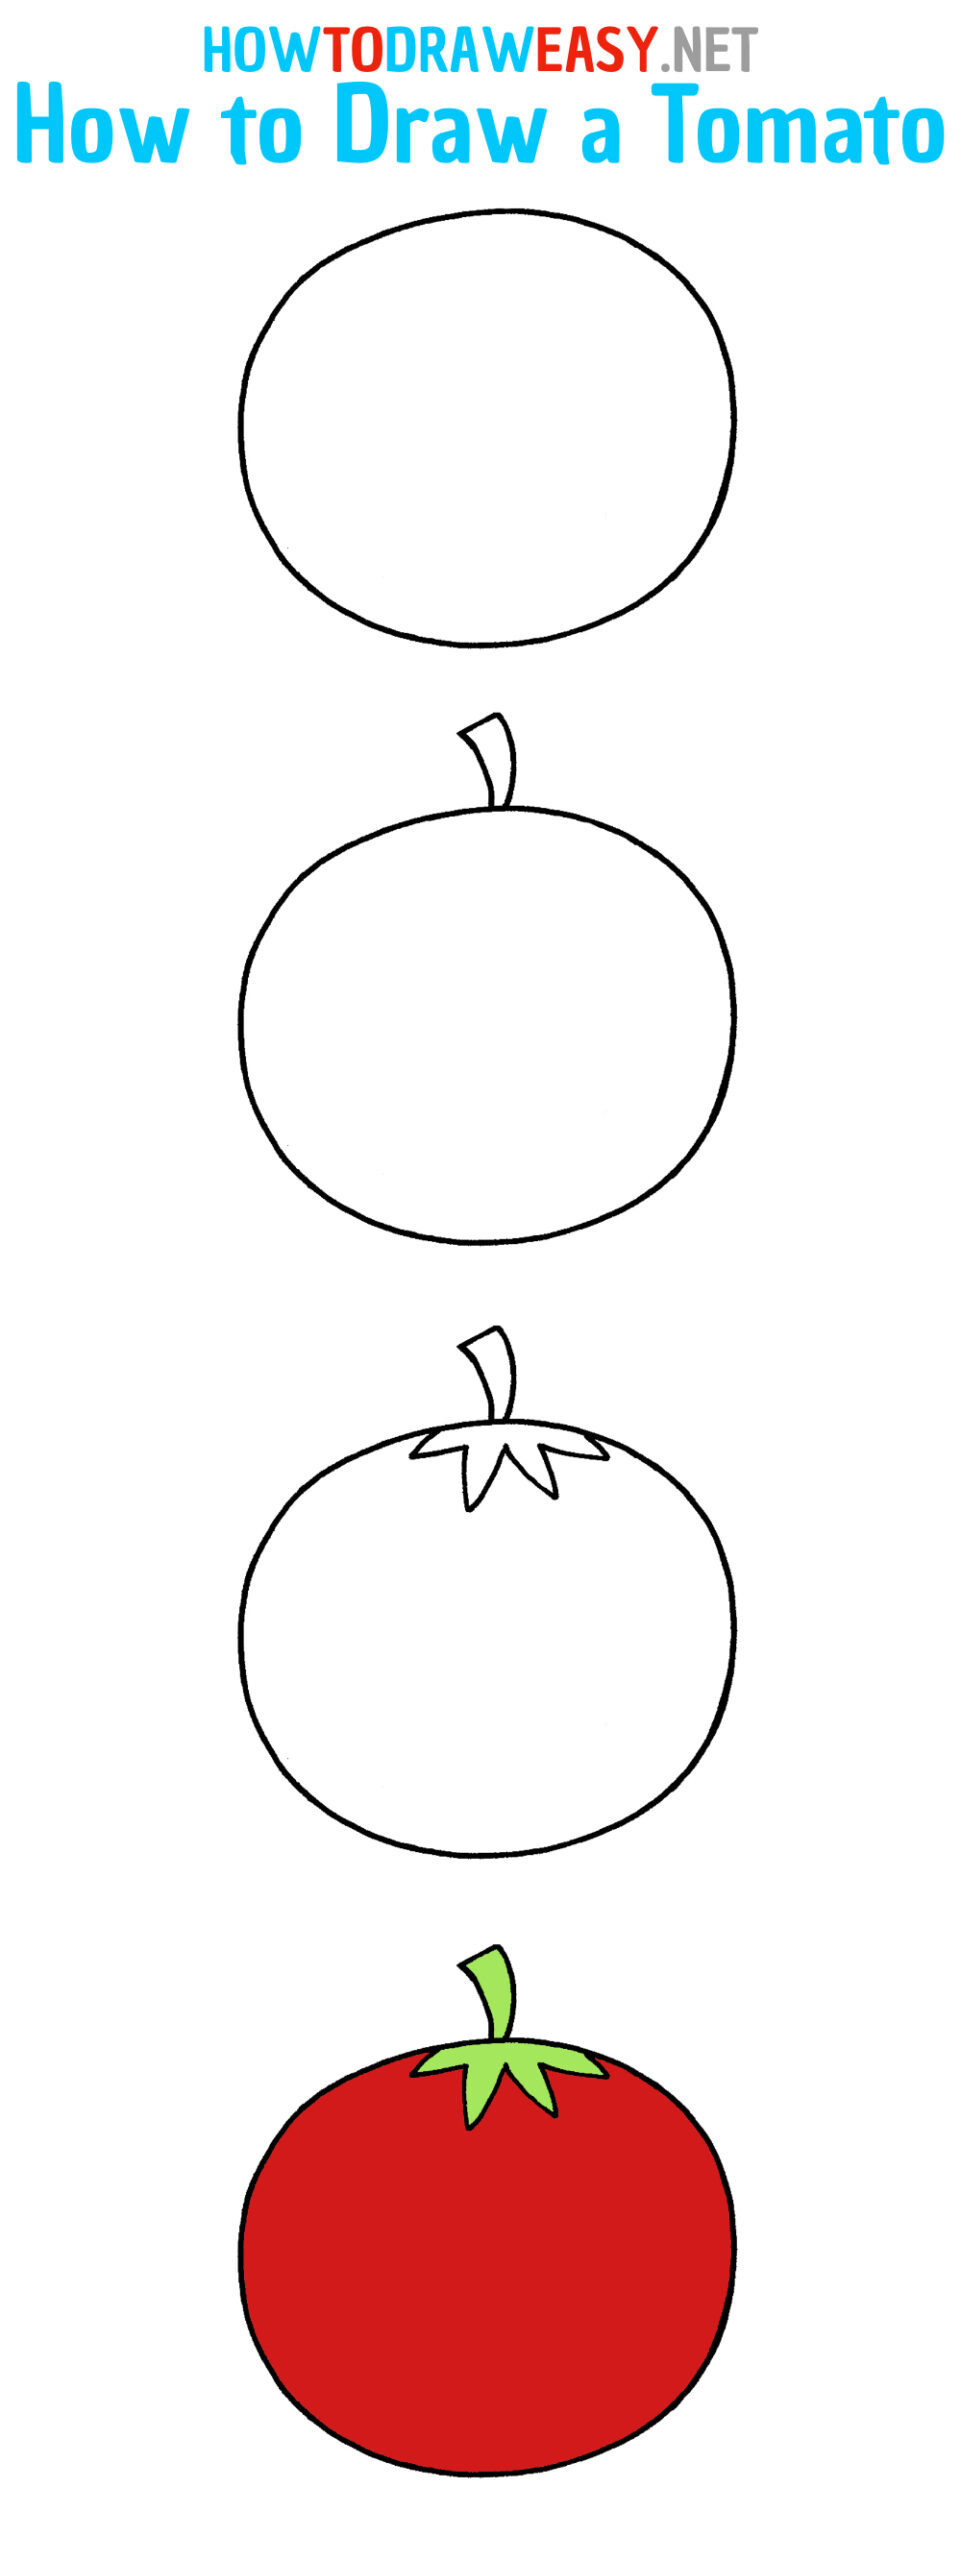 How to Draw a Tomato Easy Step by Step